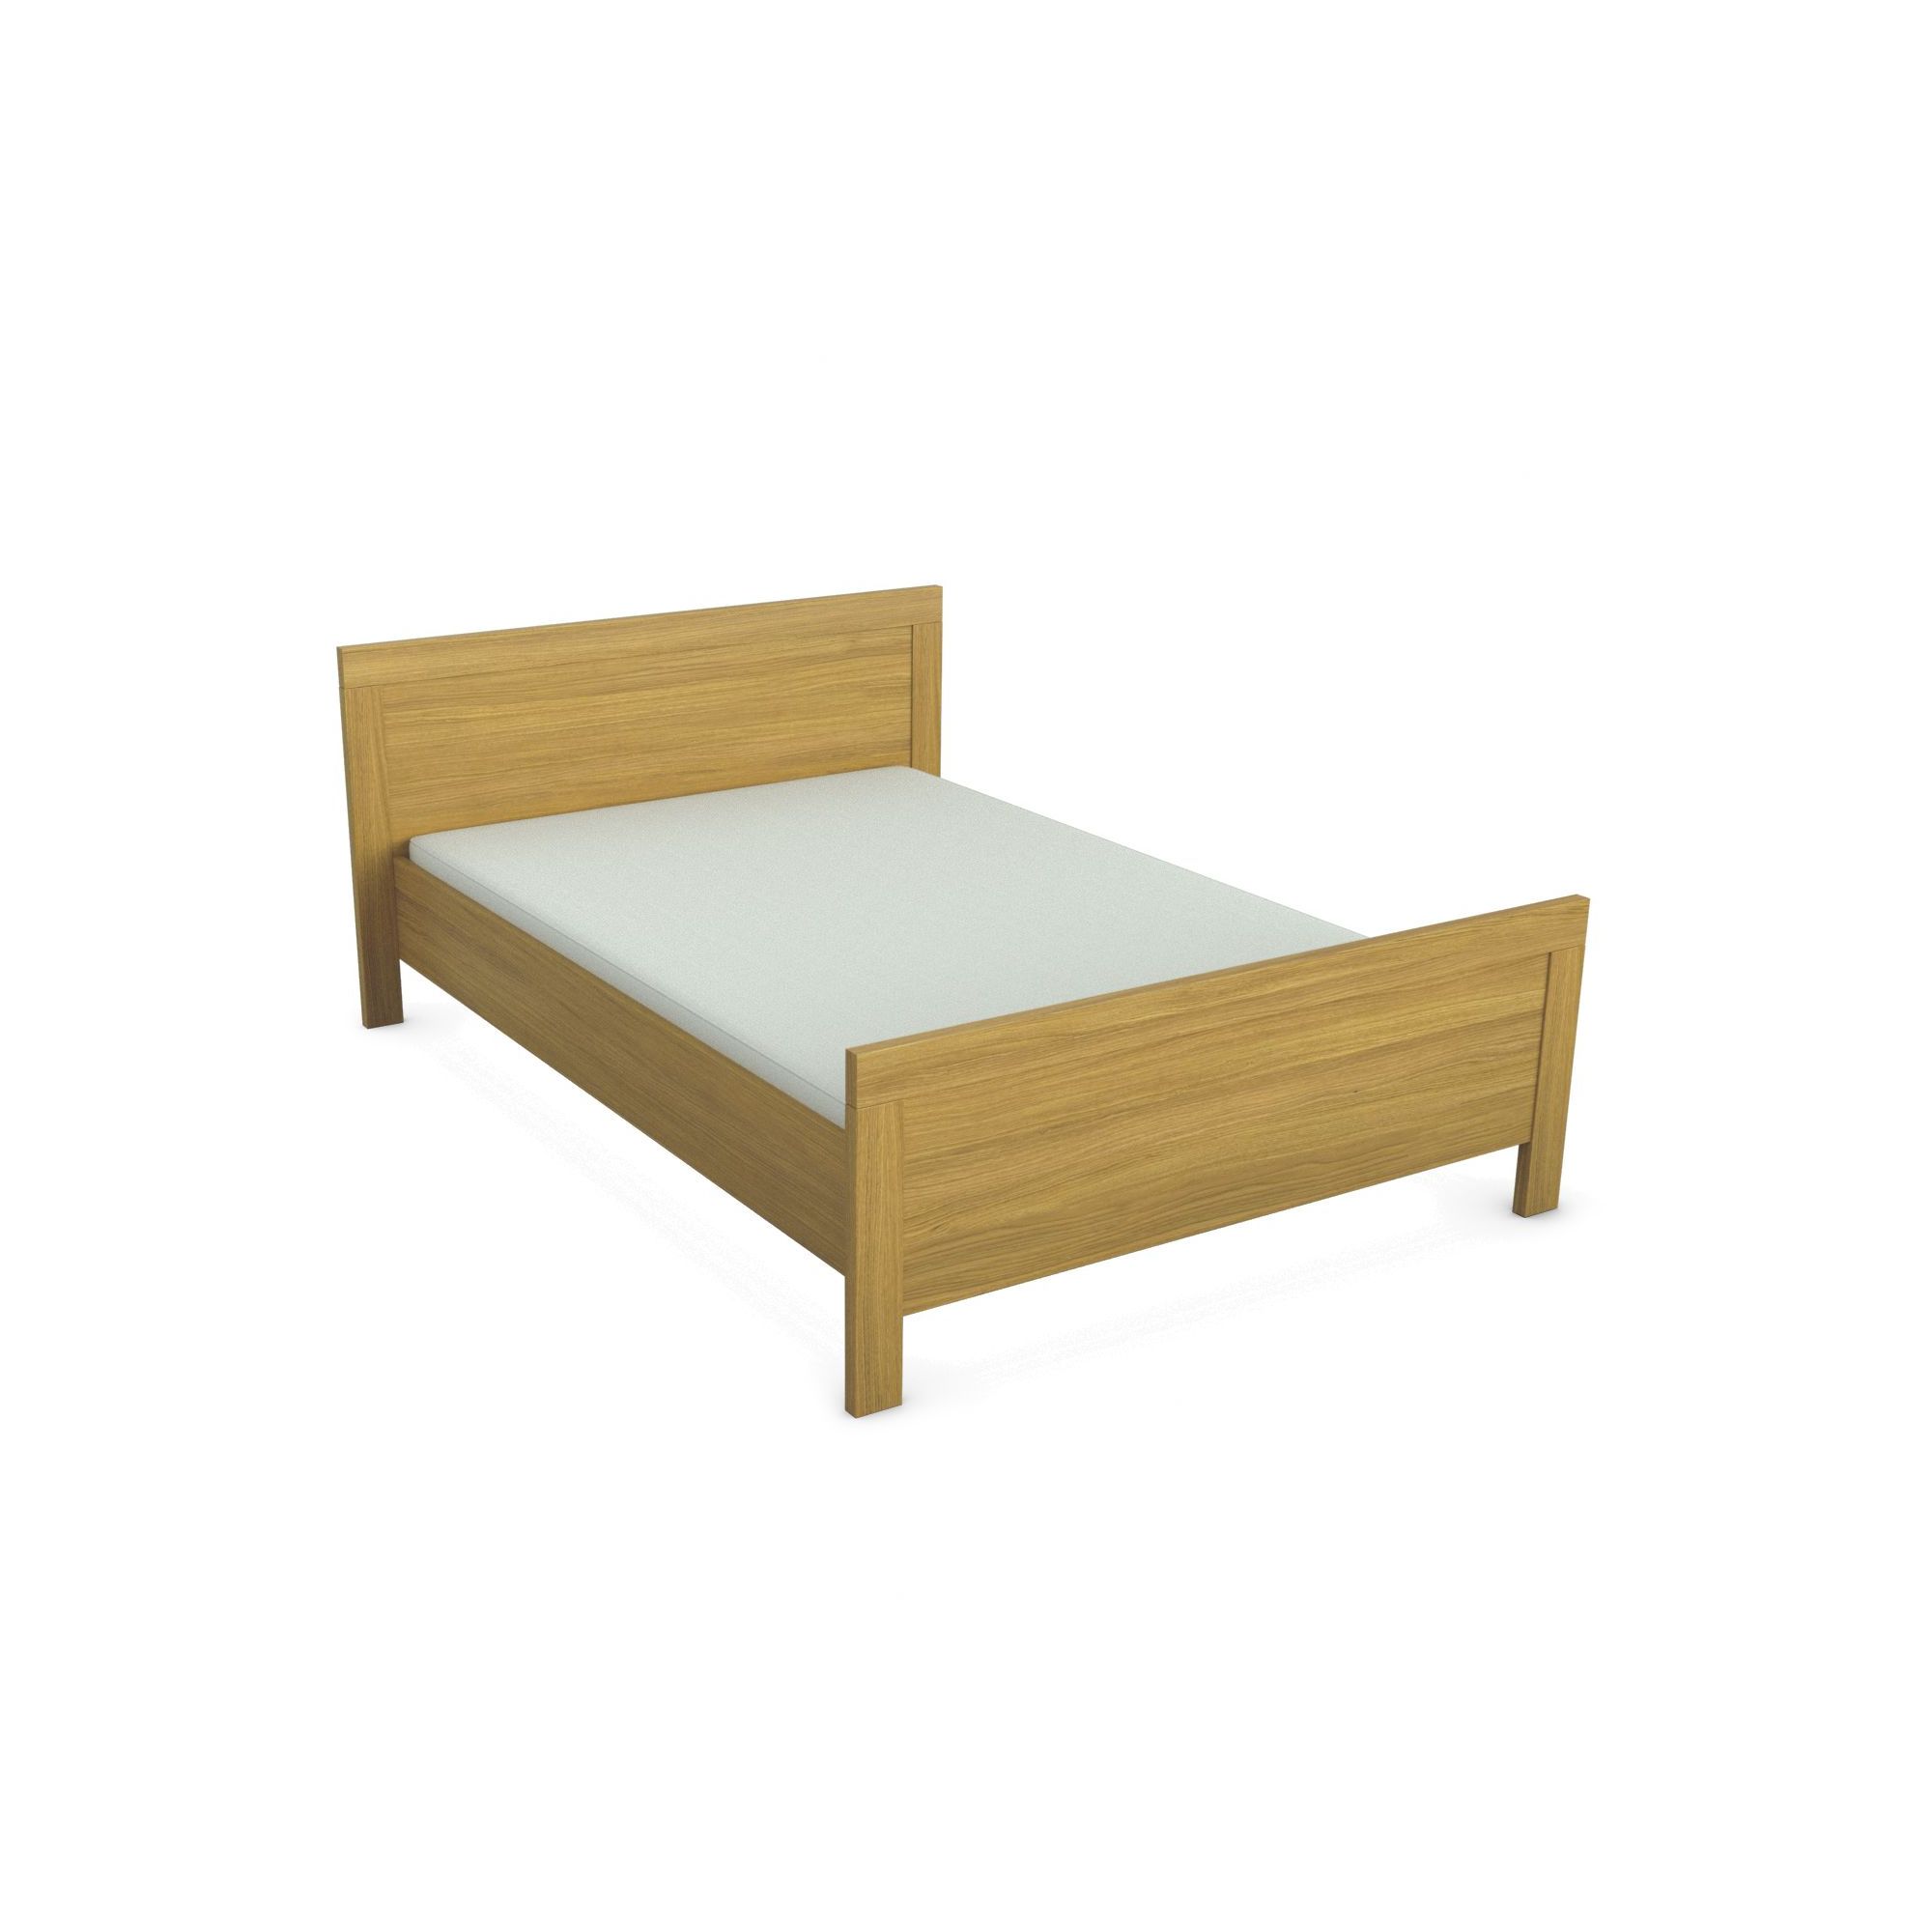 Urbane Designs Jive Double Bedstead at Tesco Direct